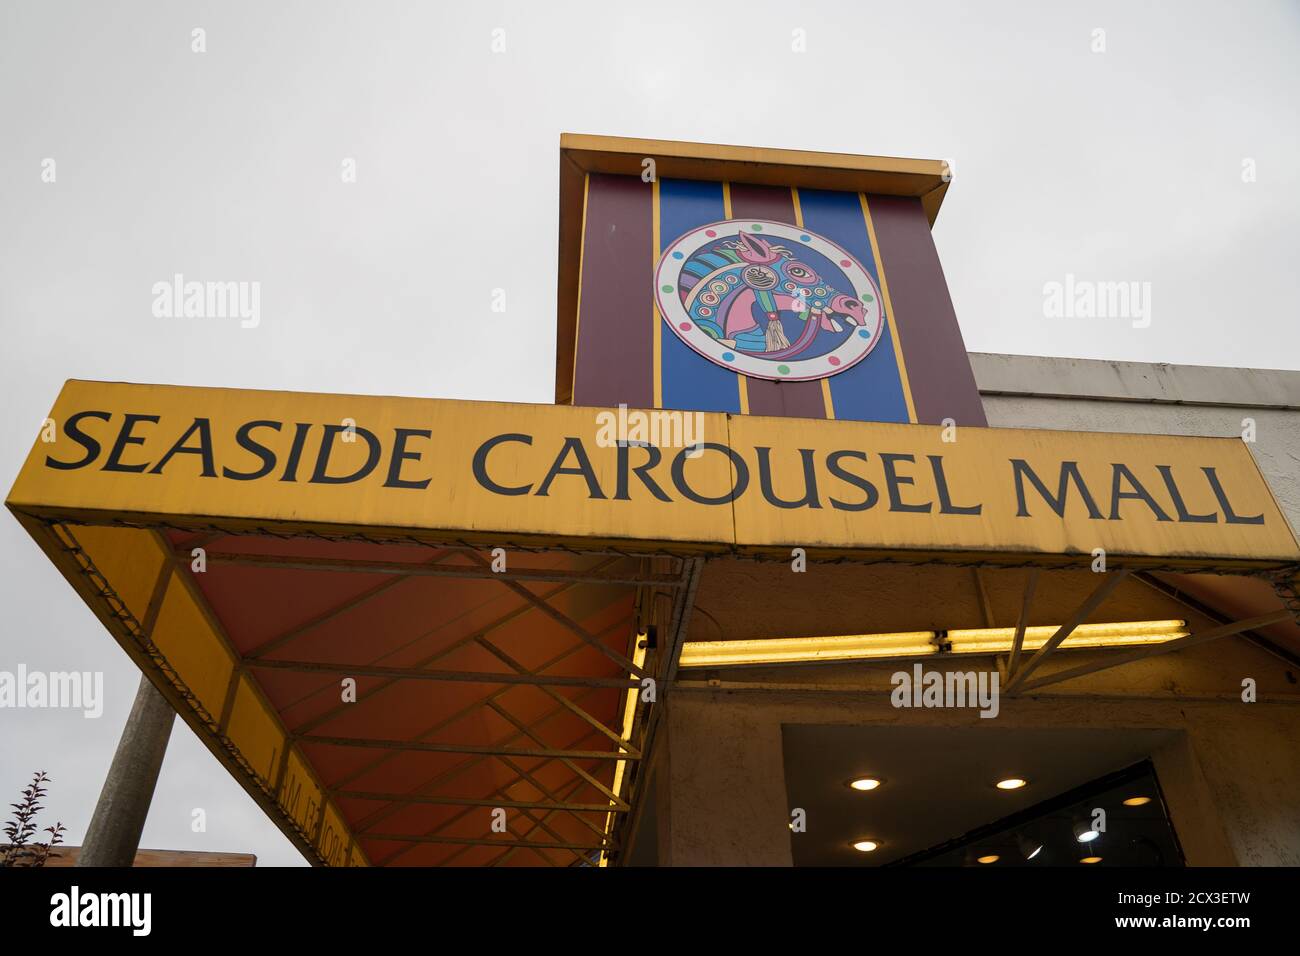 Seaside, Oregon - July 31, 2020: Sign for the Seaside Carousel Mall, an indoor shopping center filled with gift and souviner shops Stock Photo